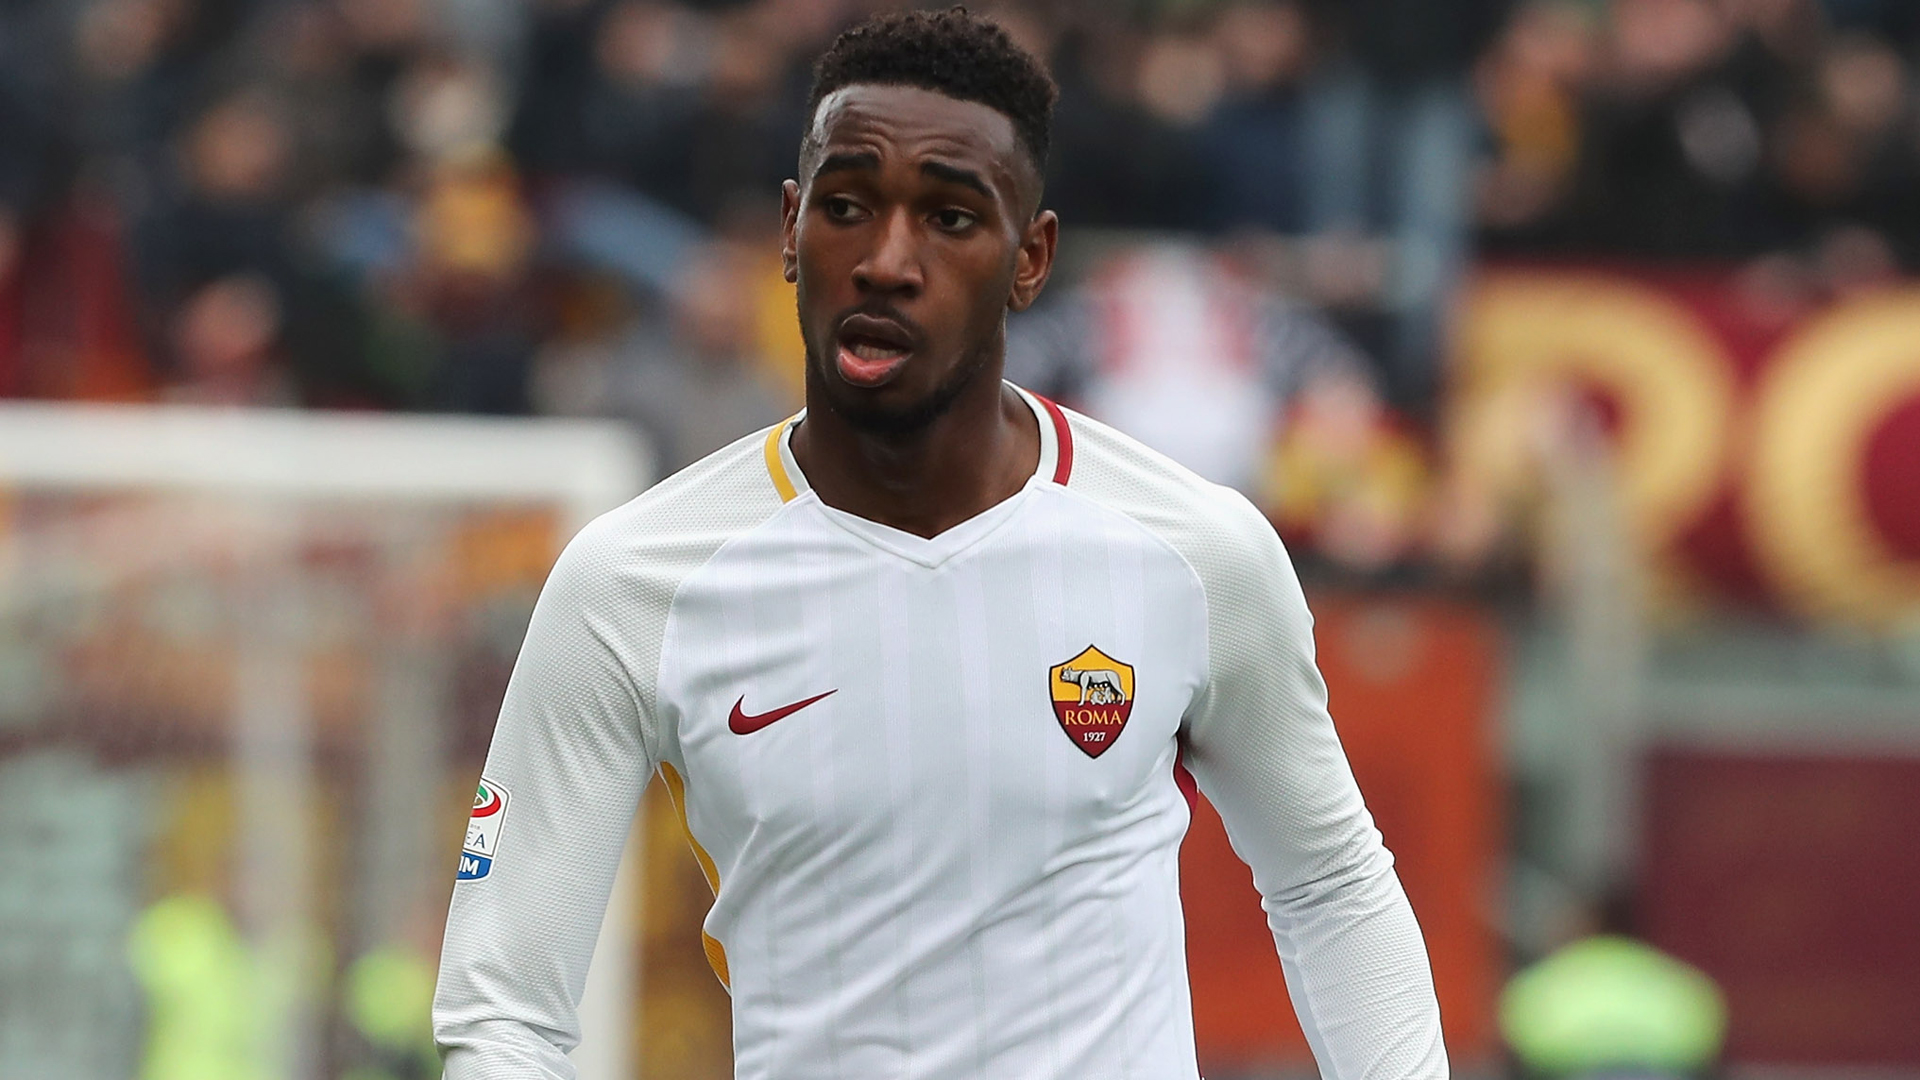 Flamengo have completed an €11.8million move for Roma midfielder Gerson.